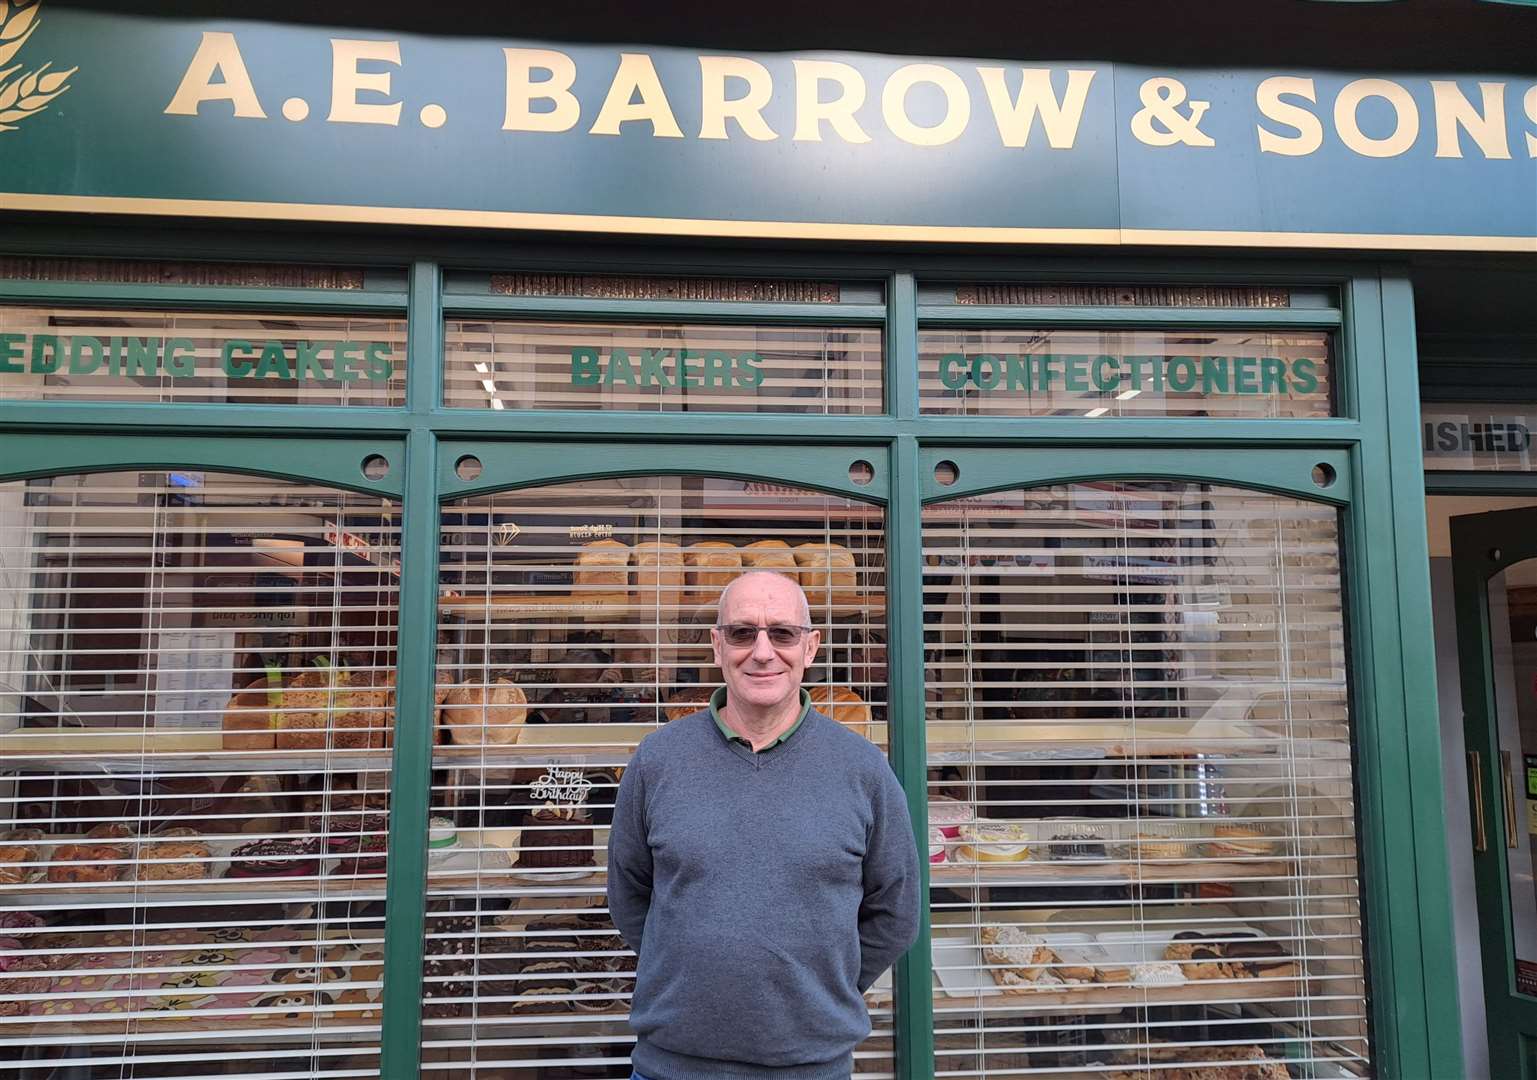 Owner of A.E Barrow and Sons, Simon Reynolds